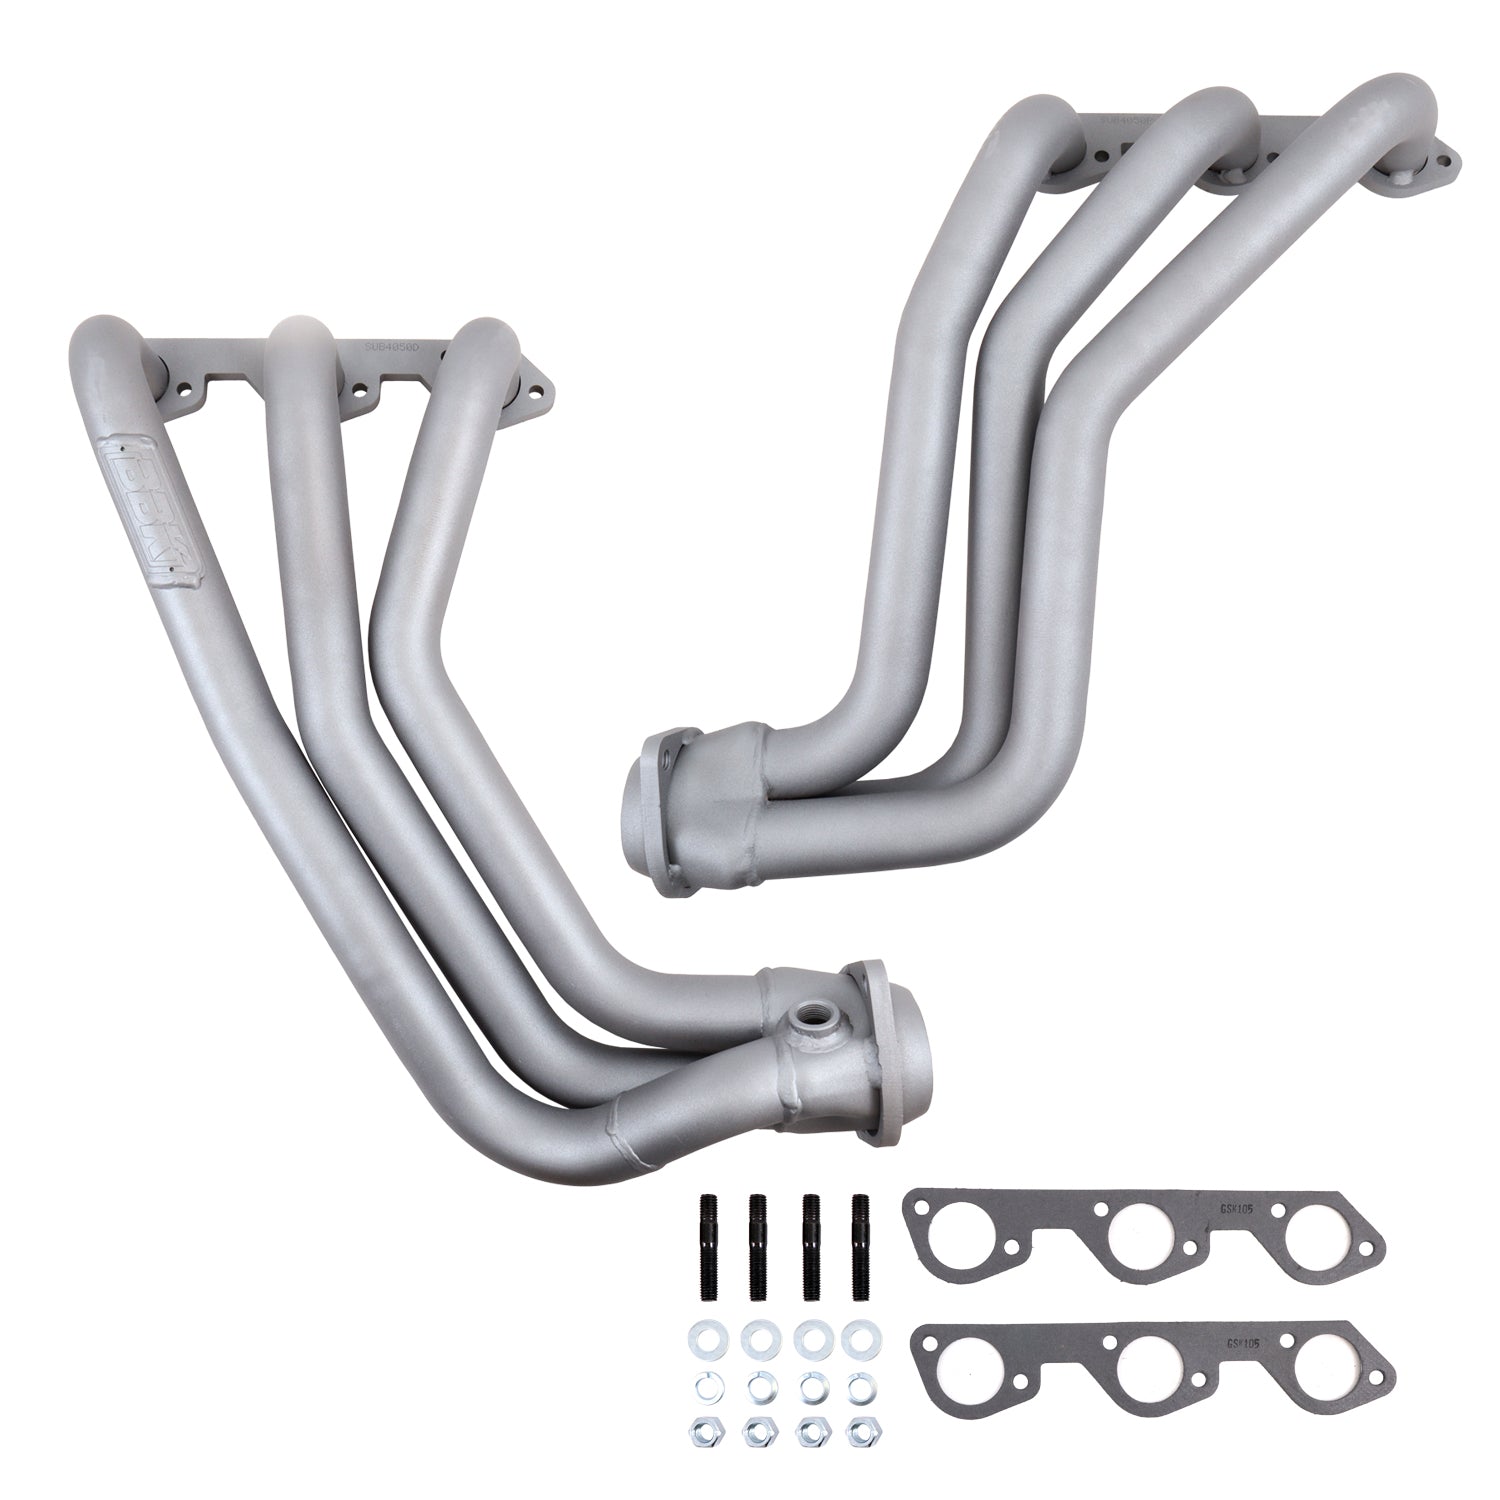 Jeep Wrangler 3.8 1-5/8 Long Tube Exhaust Headers With High Flow Cats  Titanium Ceramic 07-11